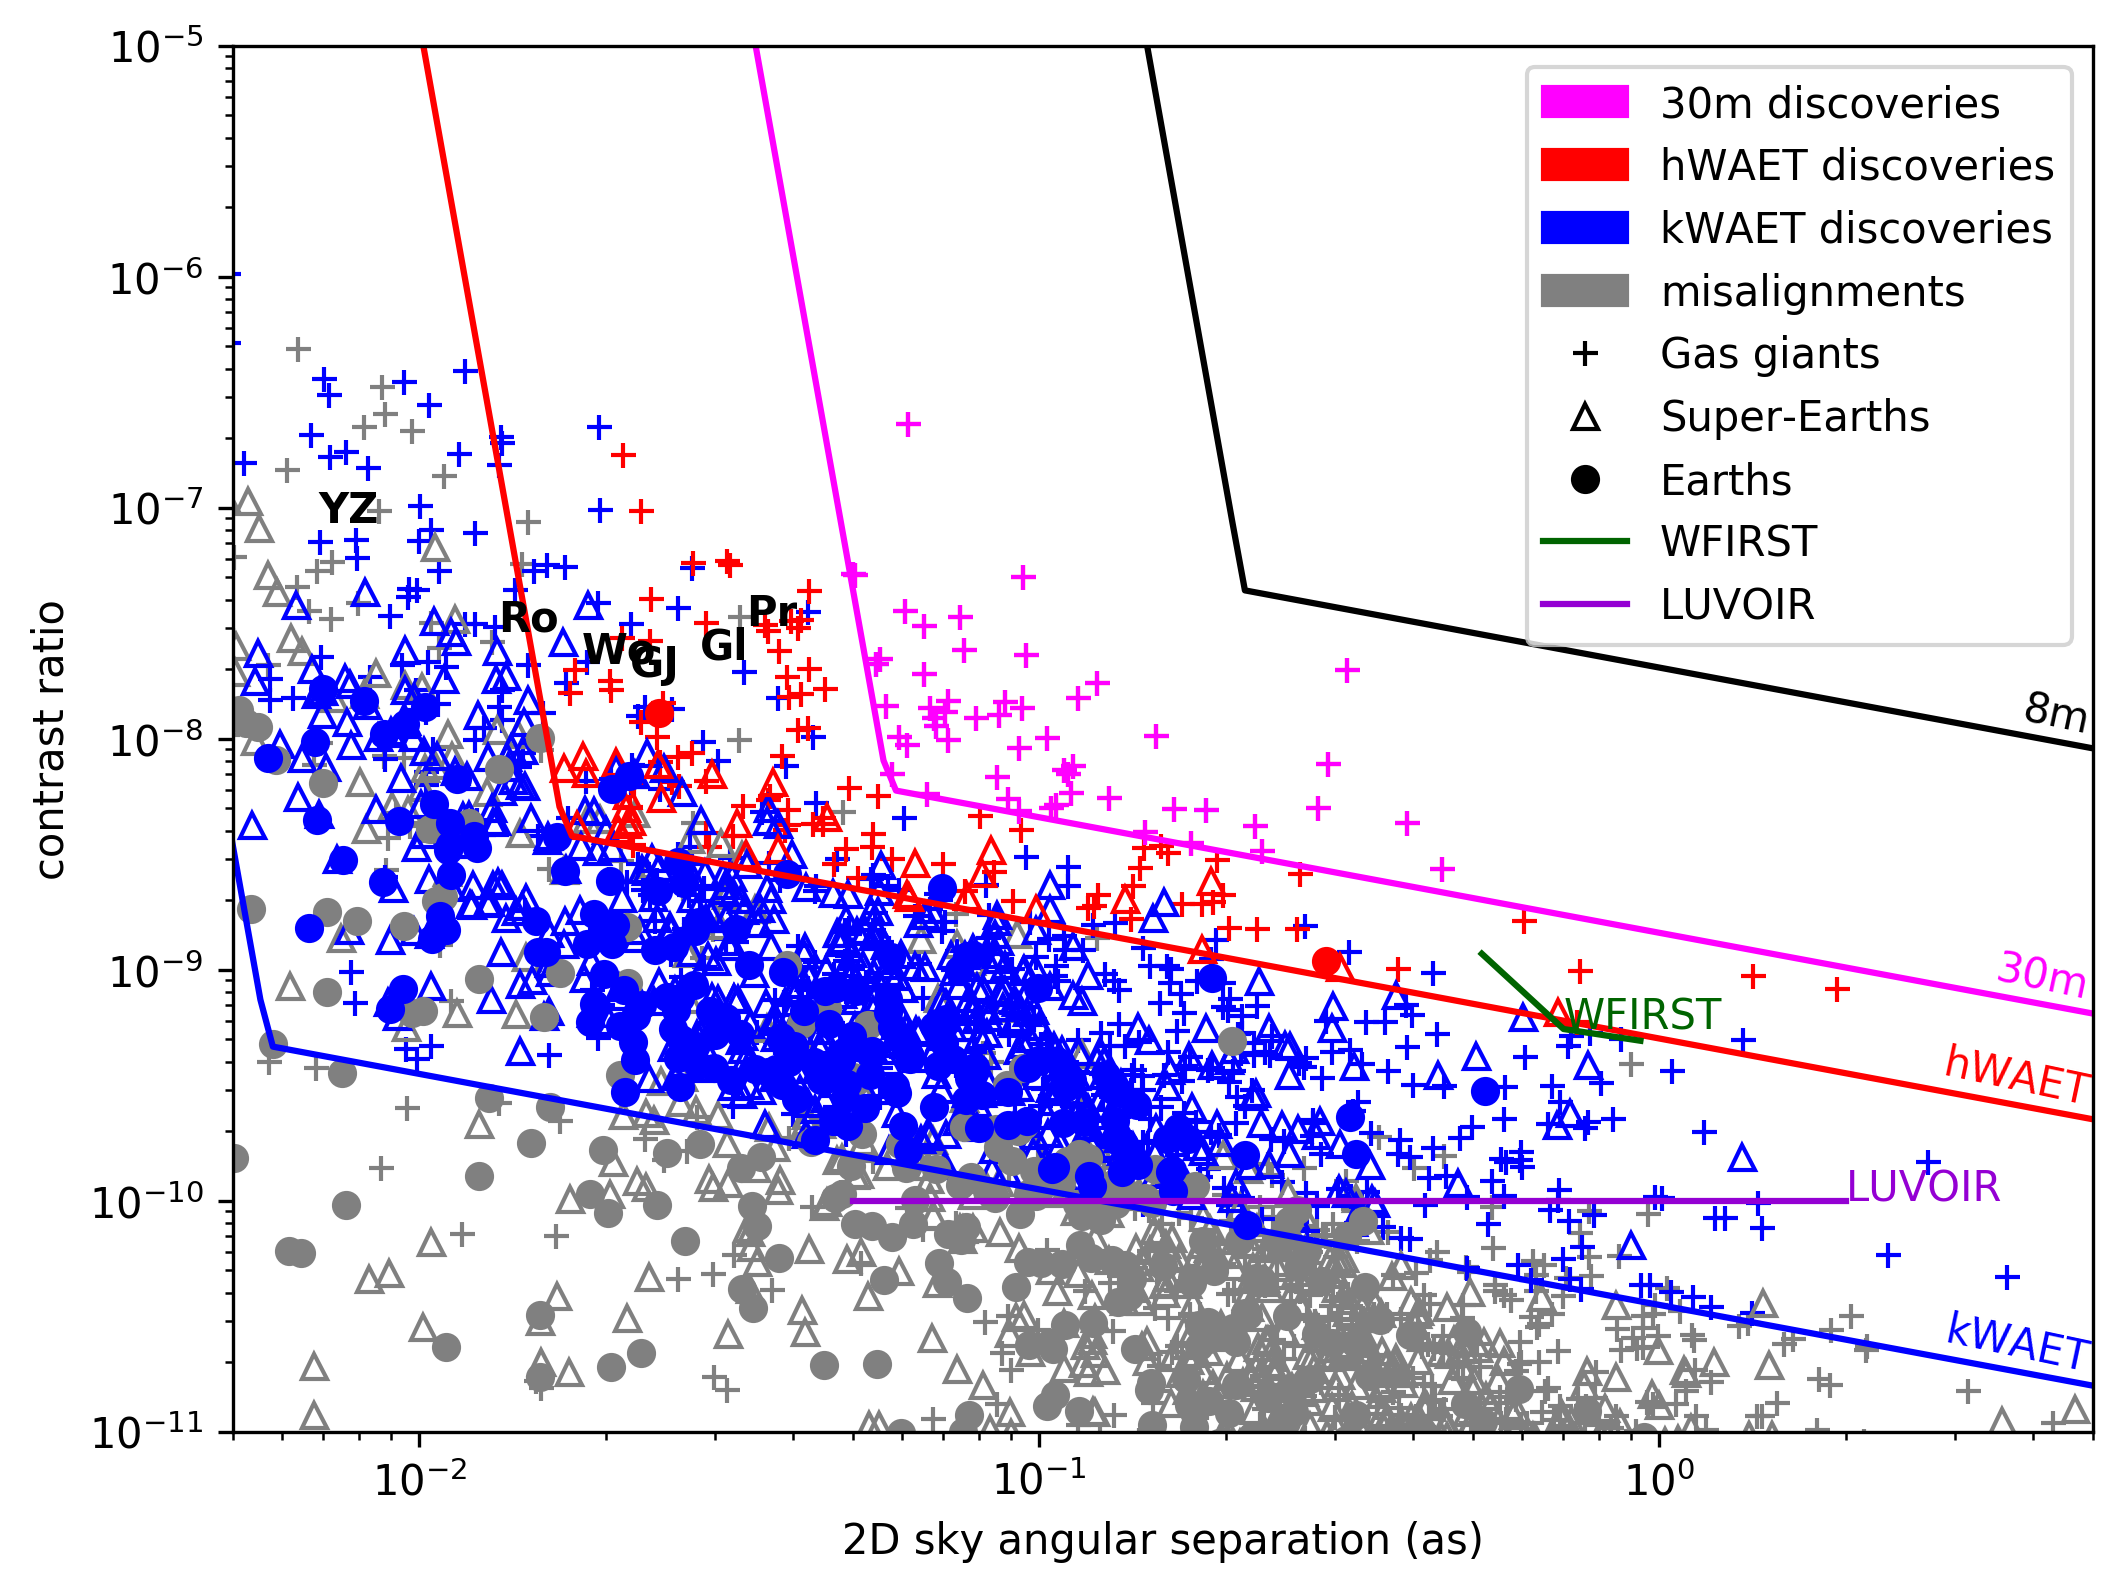 Scatter plot (contrast vs. separation) of simulated planets showing different telescopes' discovery ranges